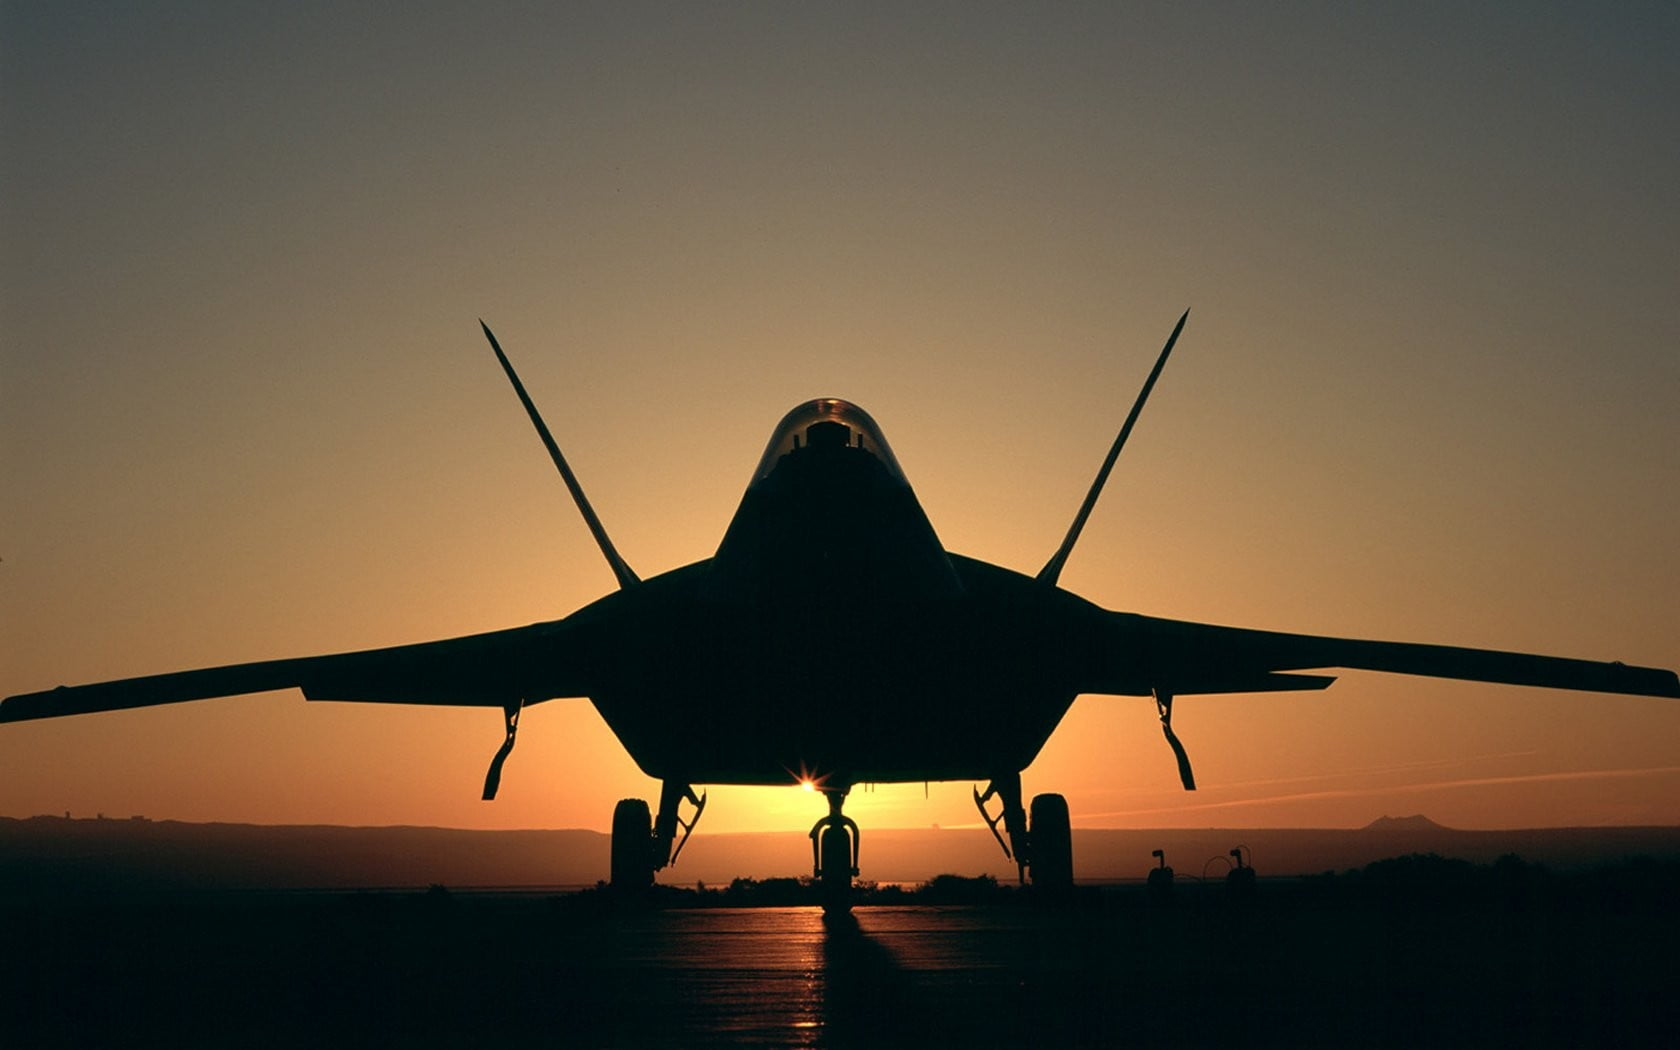 silhouette of plane, aircraft, F-22 Raptor, sunset, silhouette